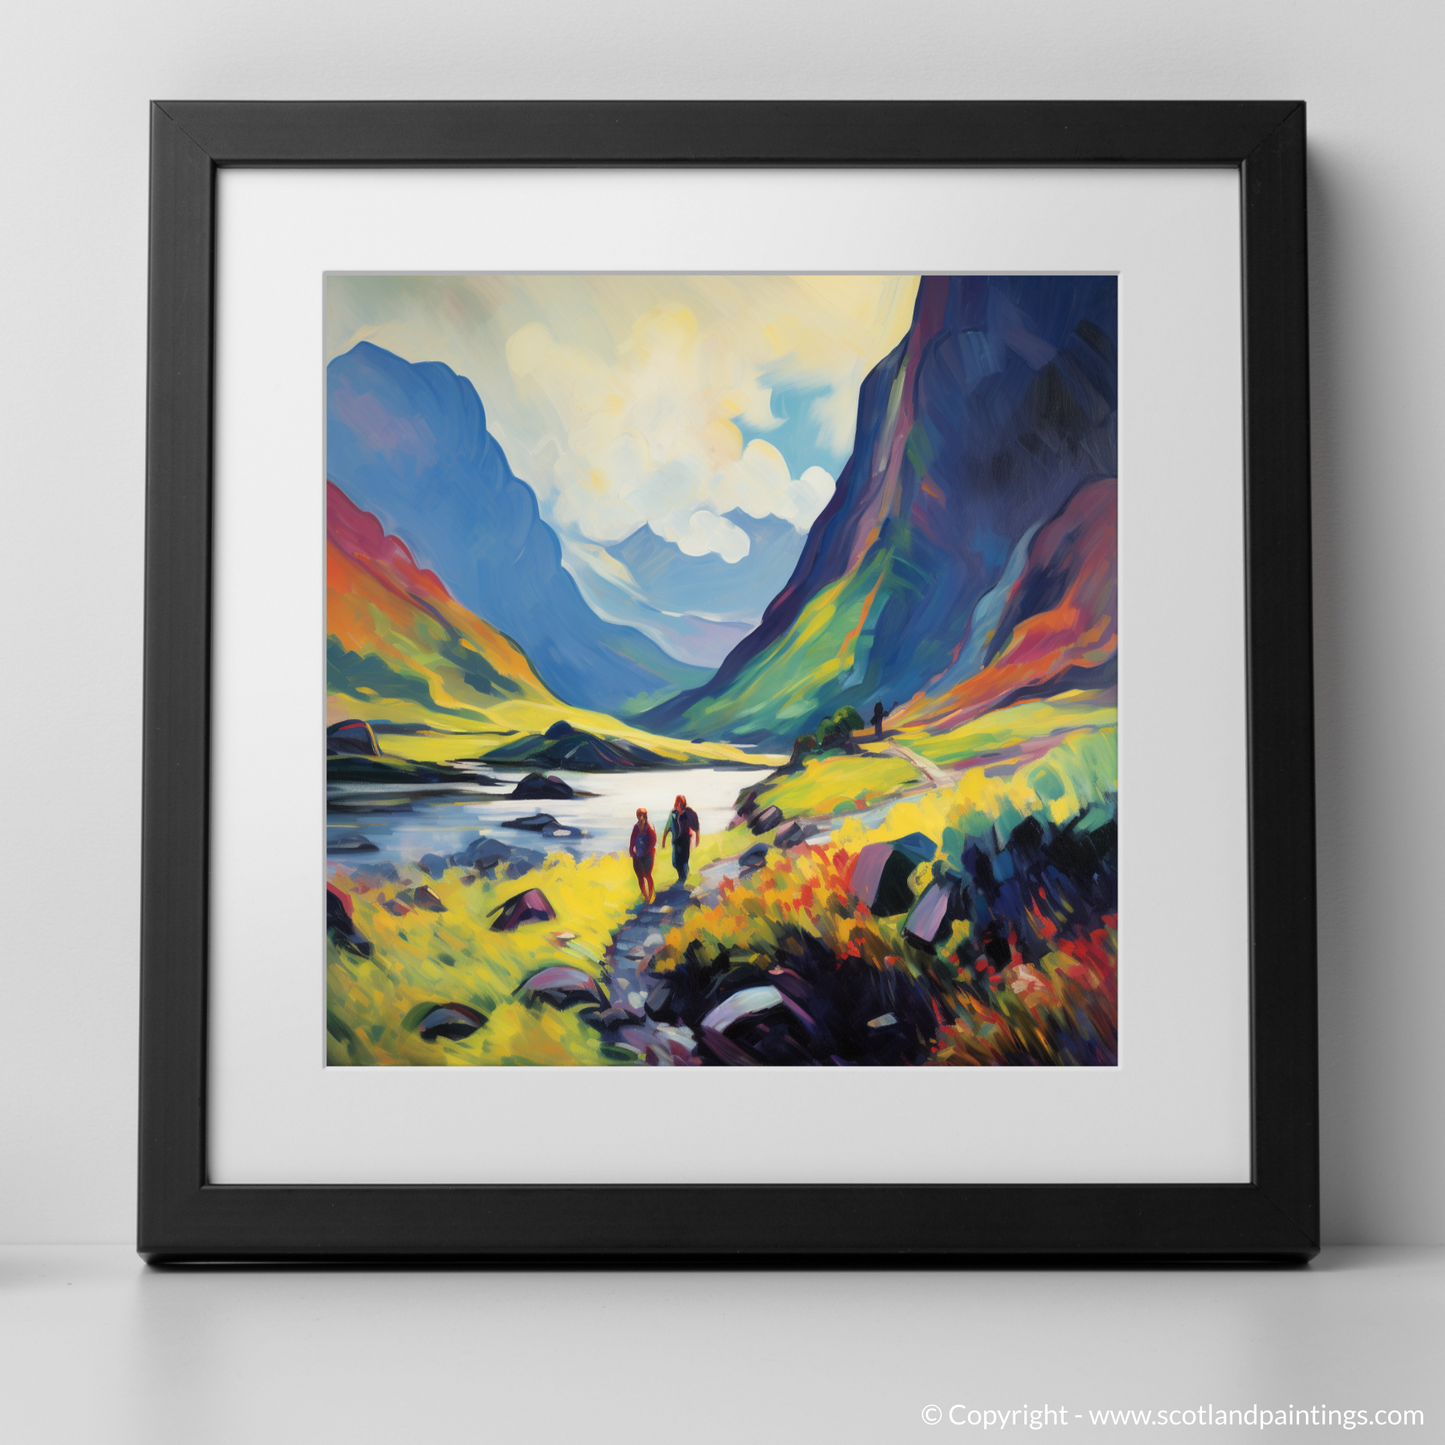 Hikers in Glencoe: A Fauvist Ode to Scotland's Wild Majesty